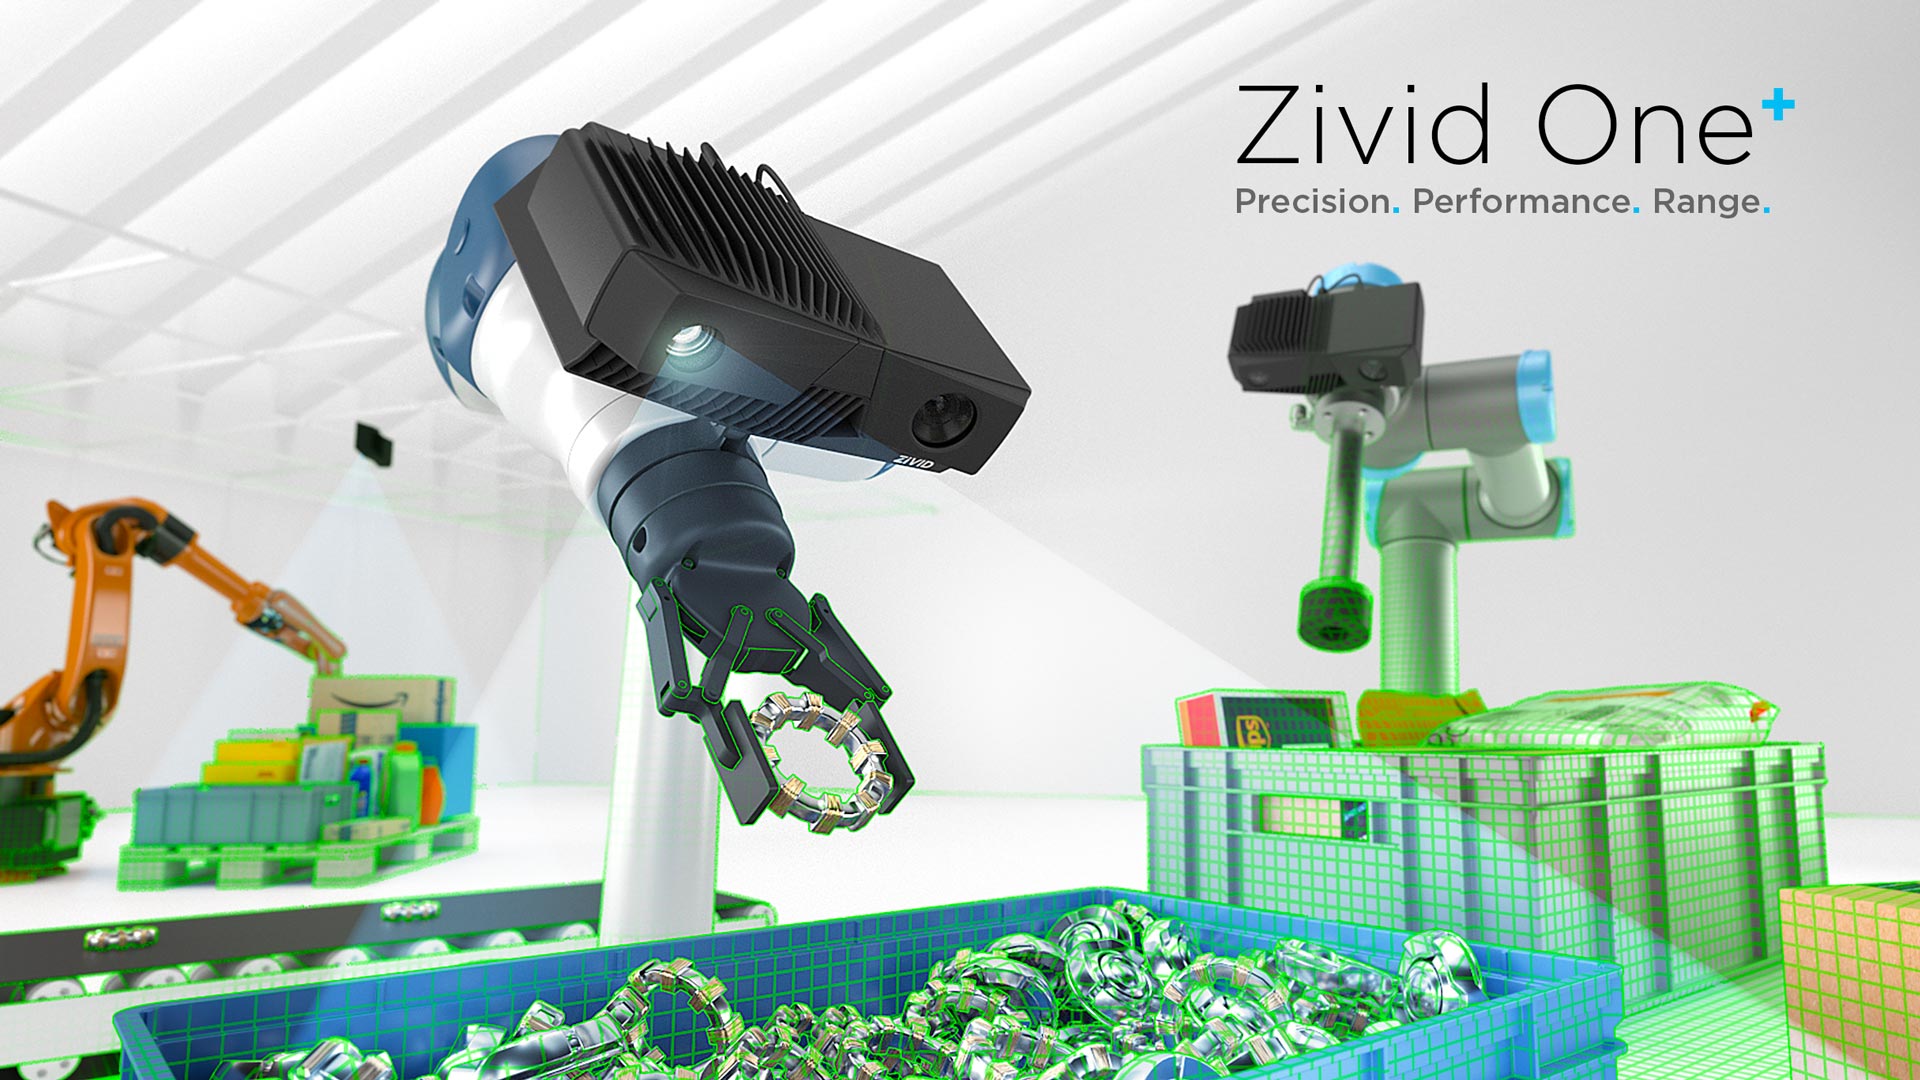 Zivid 1+ Expands Industrial Automation